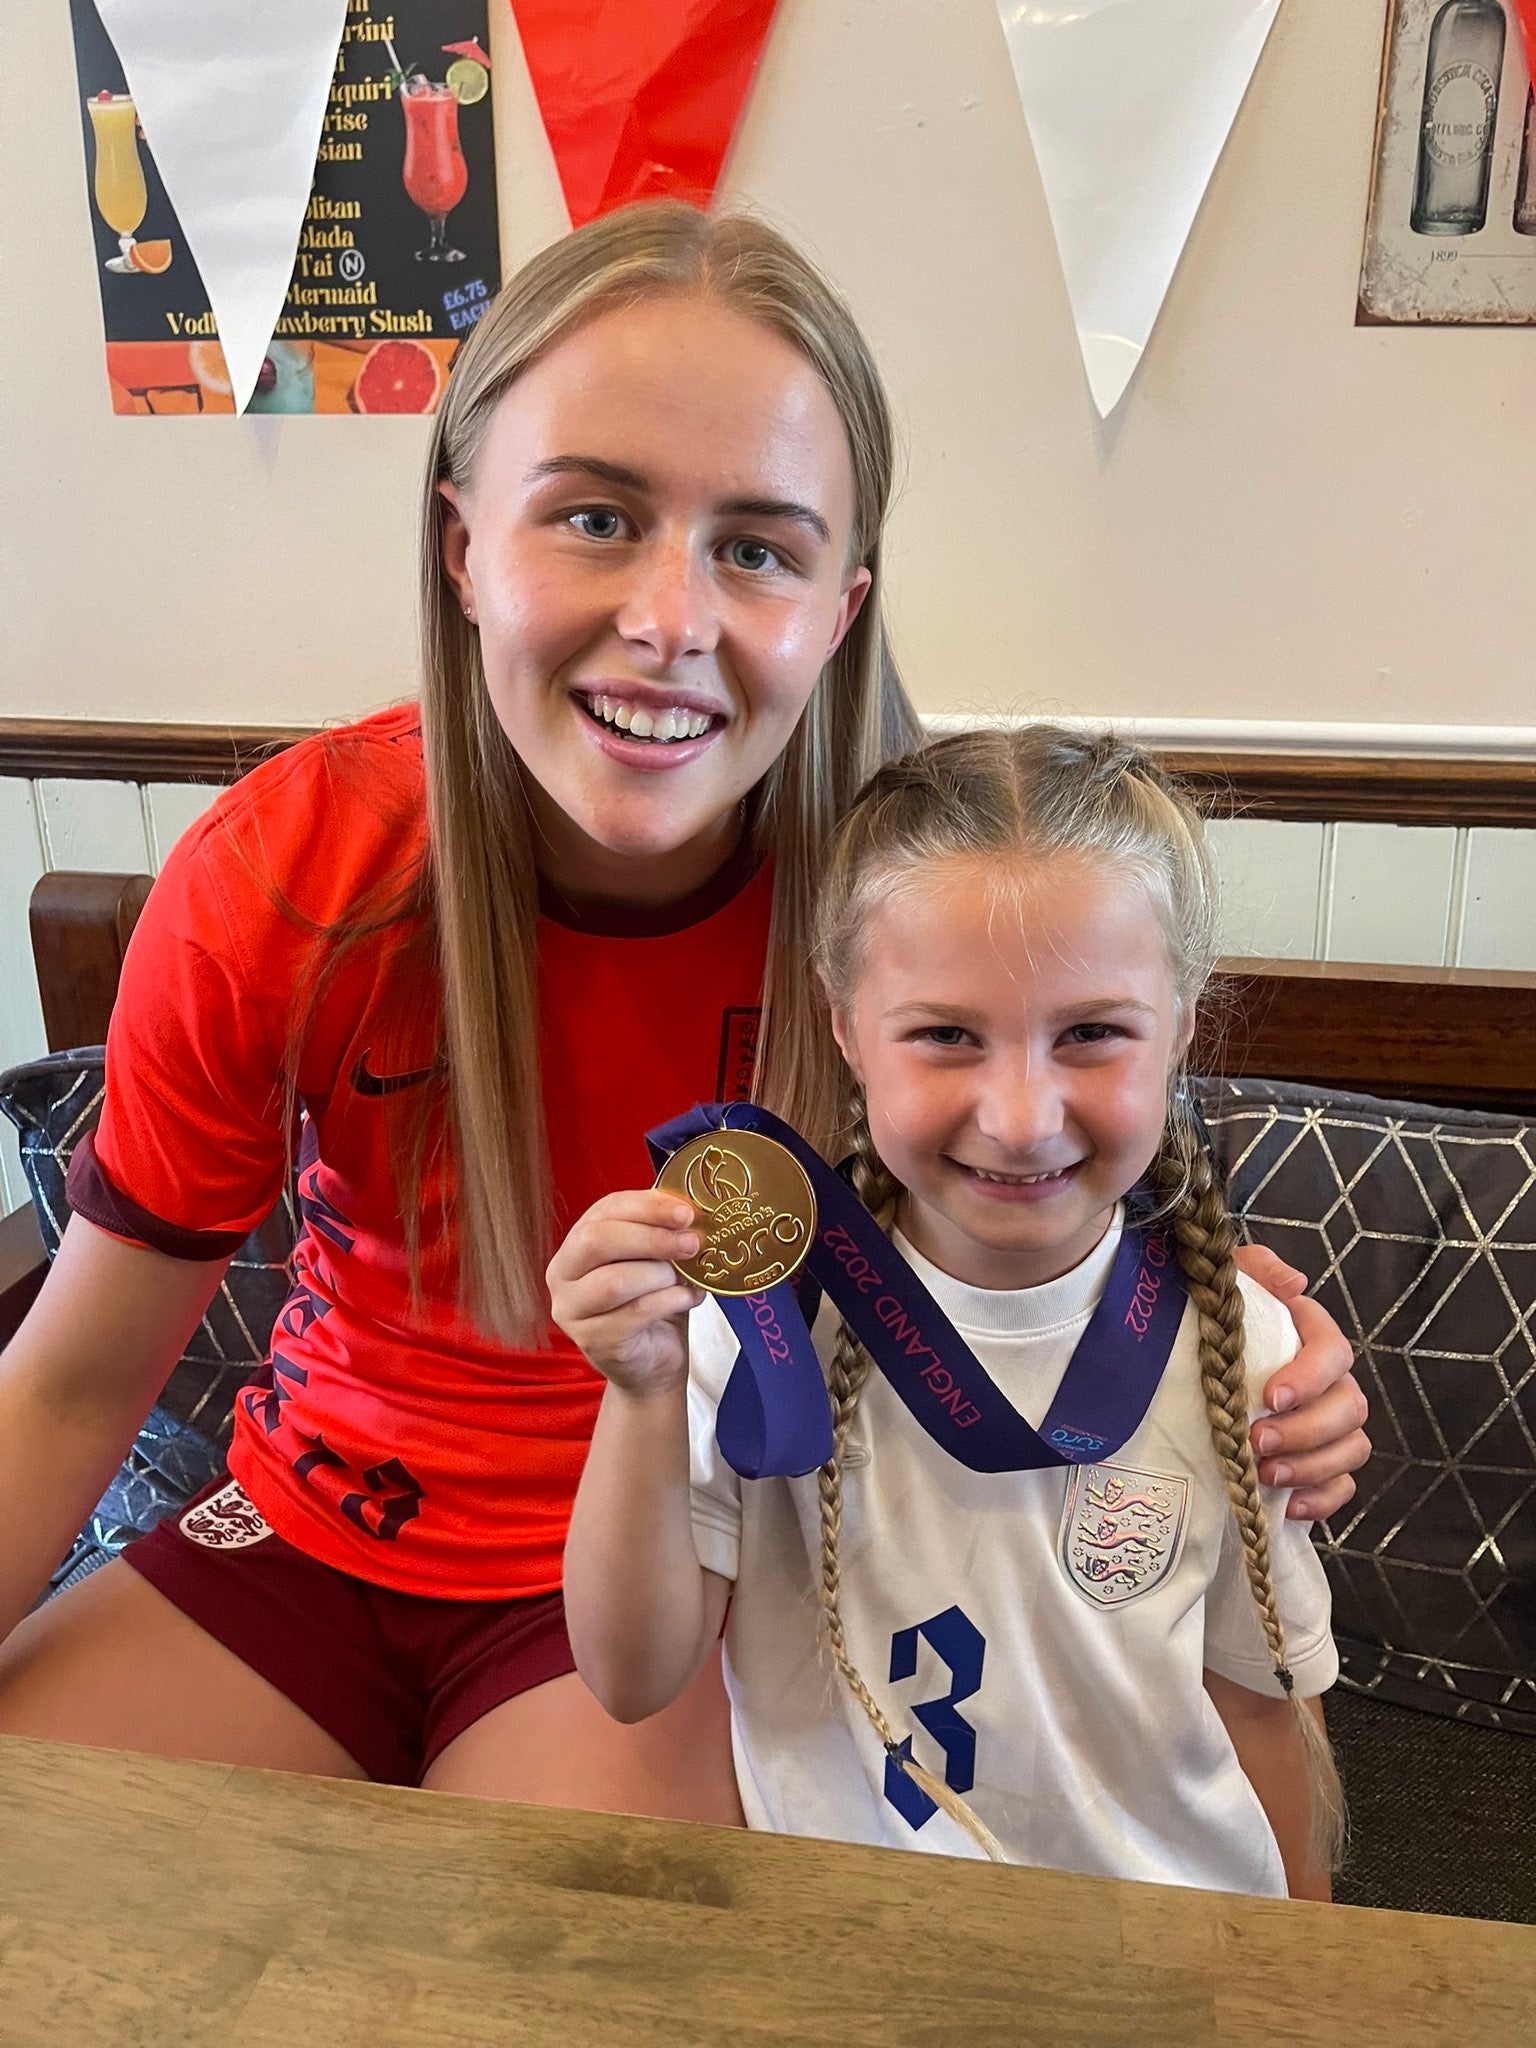 Harper Mills, 6, met one of her hero’s – Aston Villa women goalkeeper Hannah Hampton, who was on the substitutes’ bench for the dramatic final match. (Lou Mills/PA)